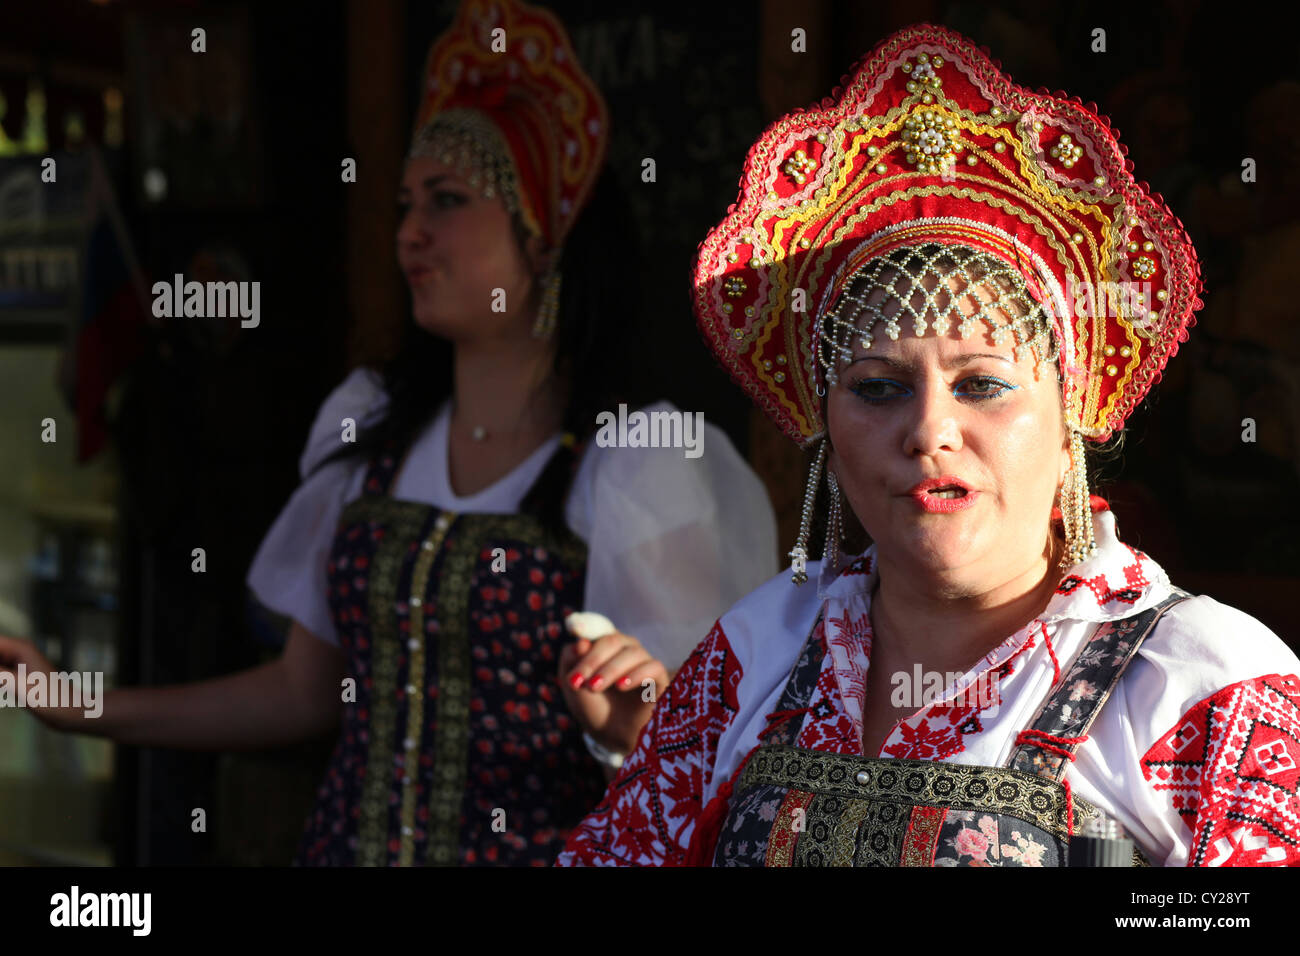 Ukrainian women celebrating a feast in Vyshyvanka, a traditional clothing which contains elements of Ukrainian ethnic embroidery Stock Photo